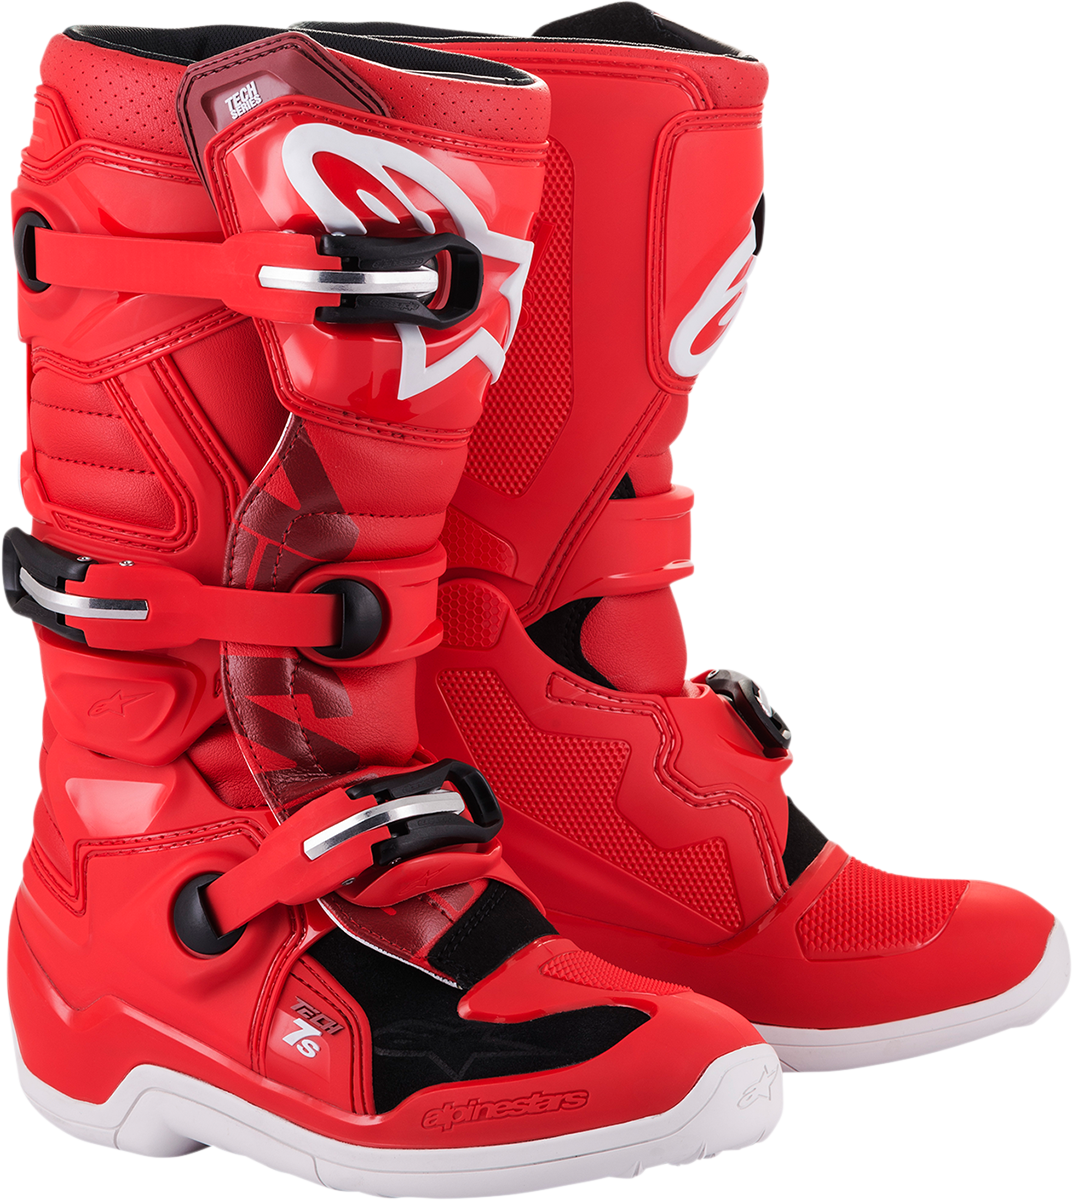 ALPINESTARS Youth Tech 7S Boots - Red - US 3 2015017-30-3